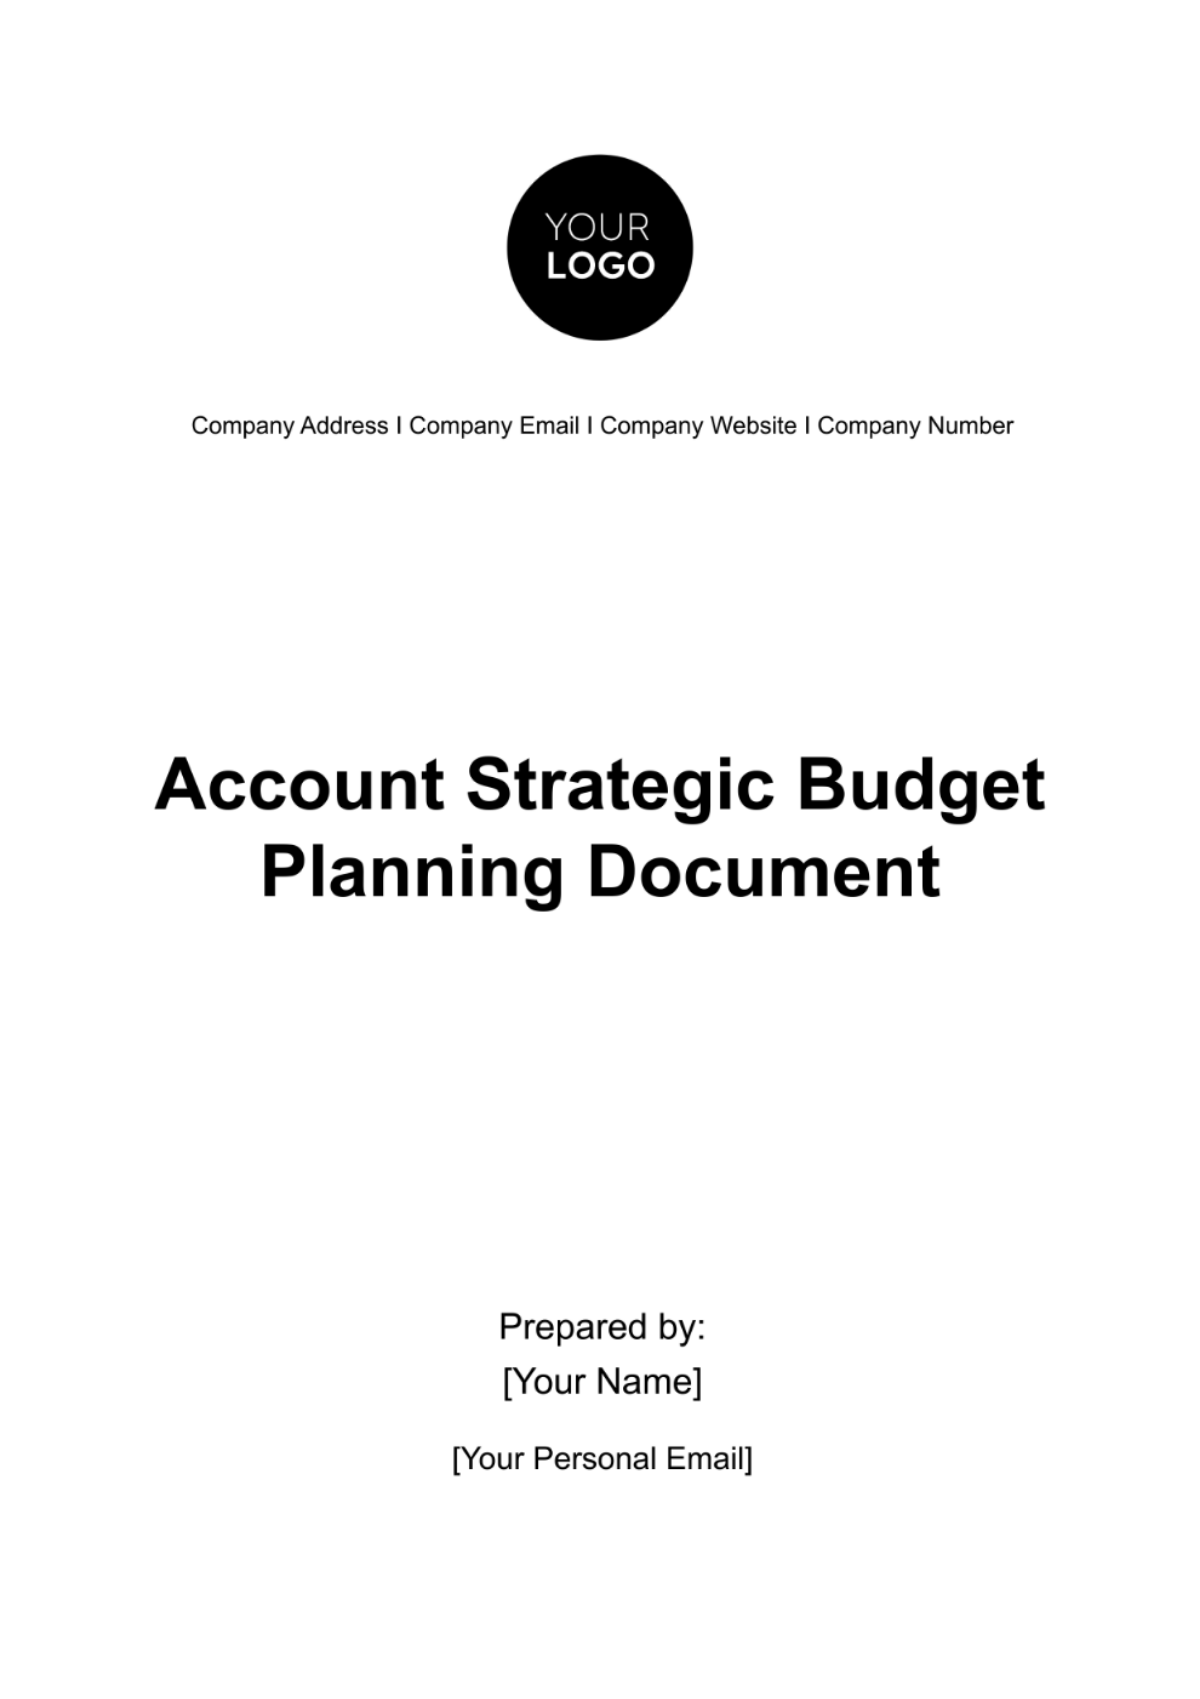 Account Strategic Budget Planning Document Template